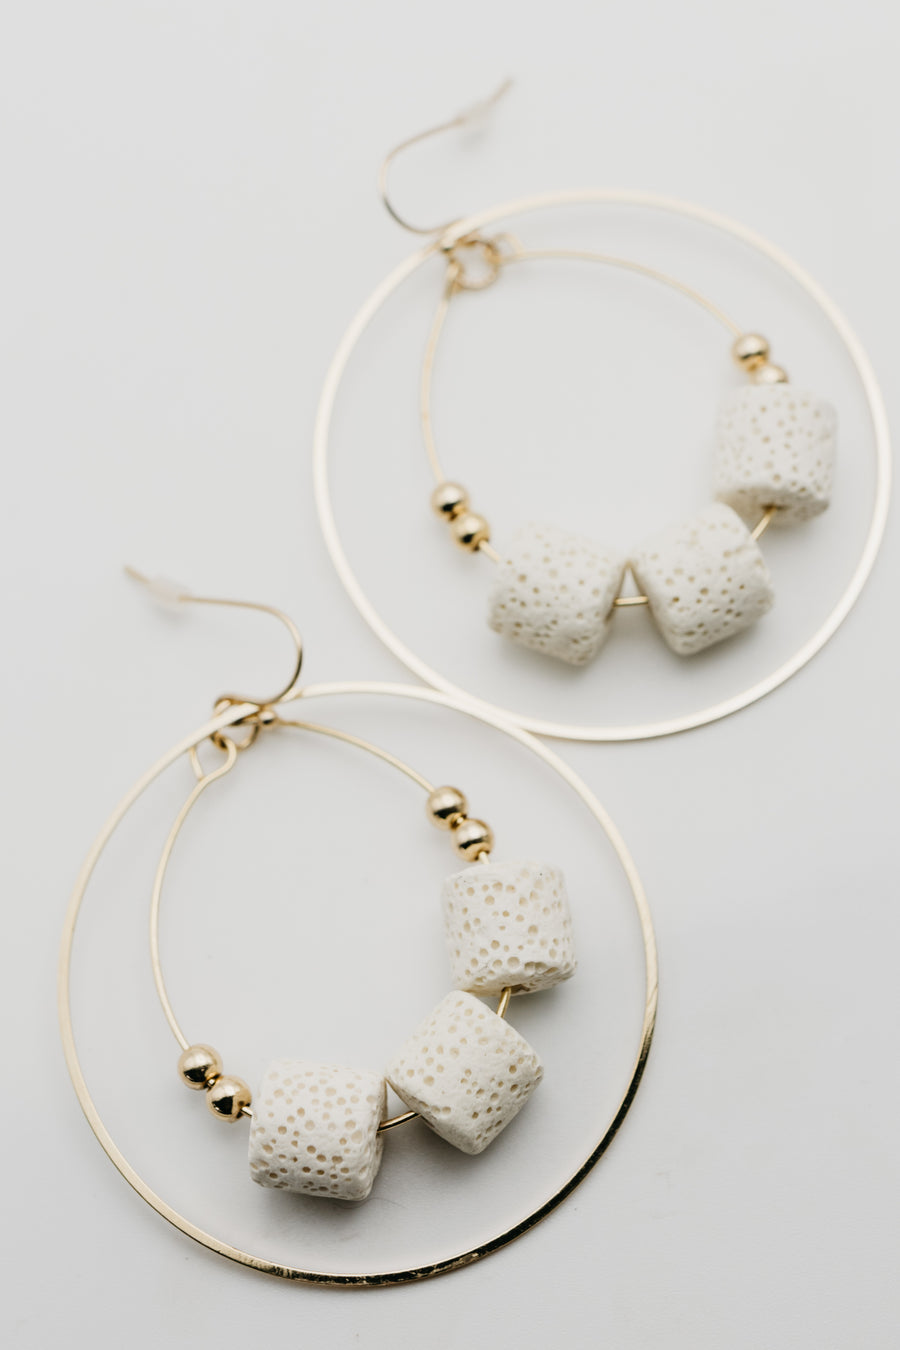 The Chloee Lava Stone Earring